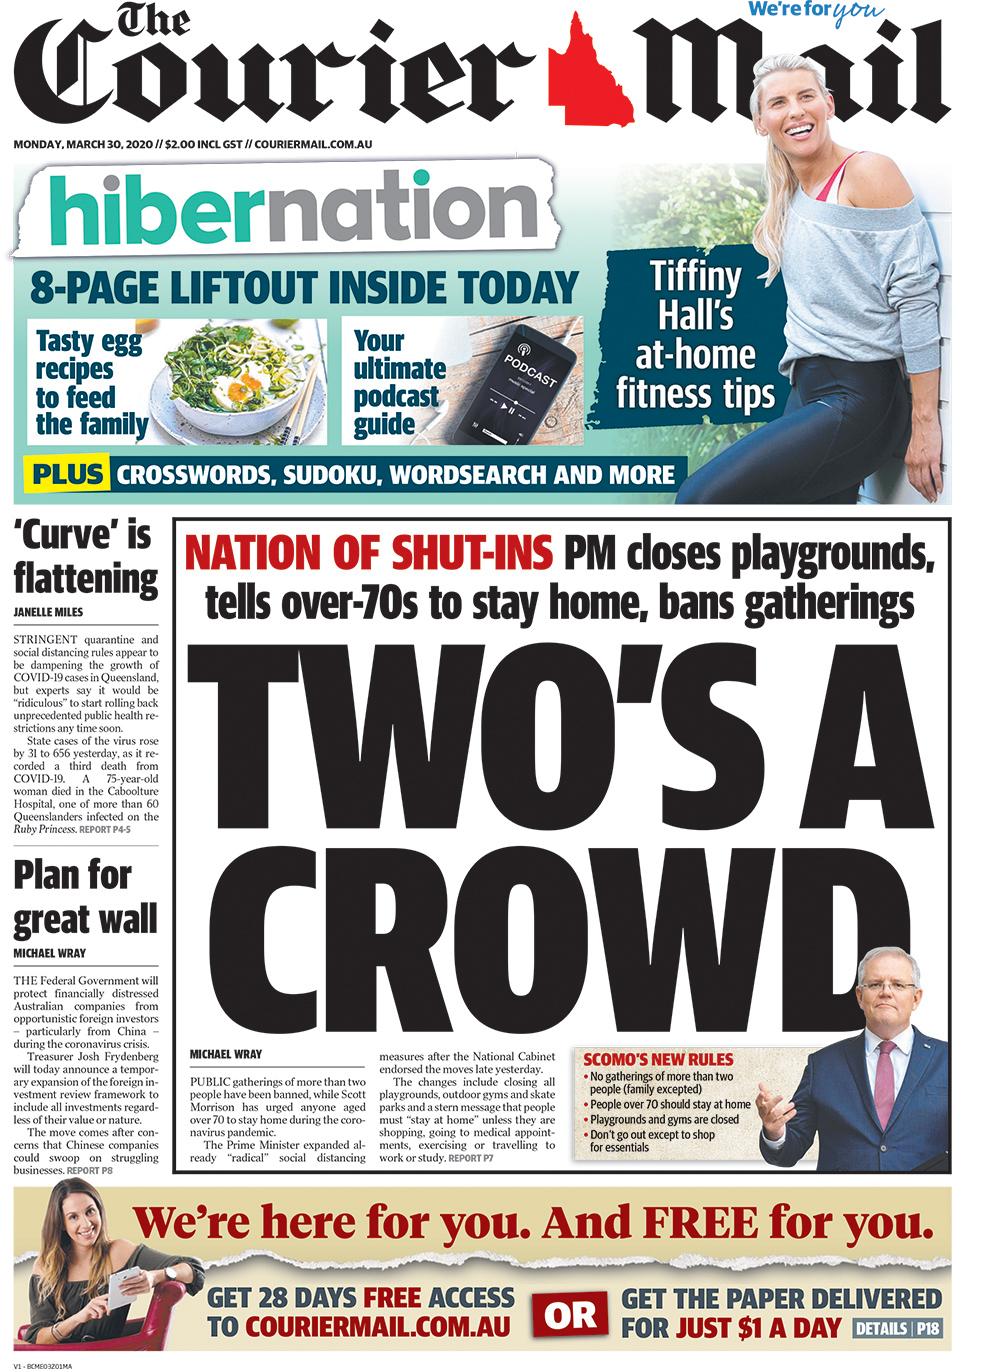 PM tells over70s to stay home and bans gatherings The Courier Mail